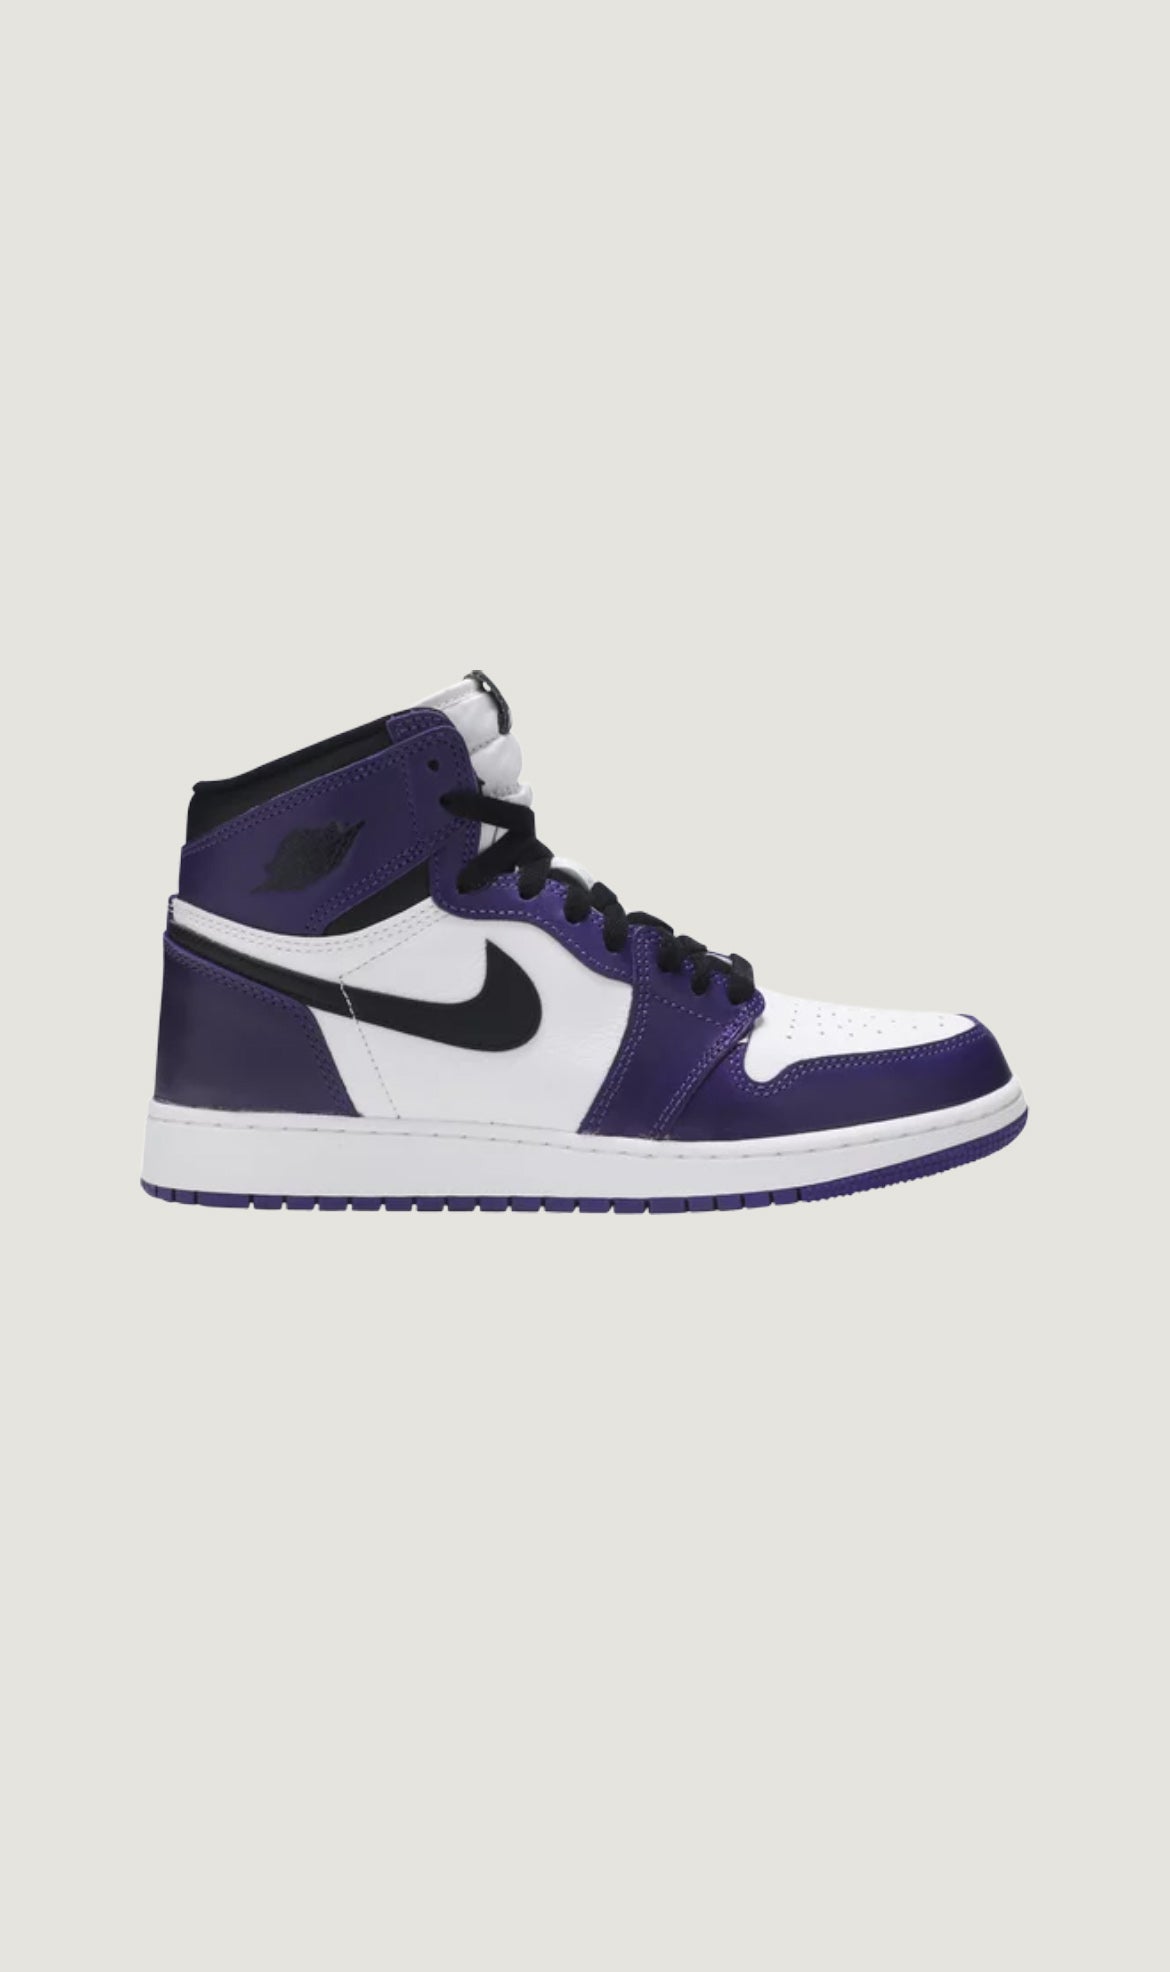 Load image into Gallery viewer, AIR JORDAN 1 RETRO HIGH OG GS - COURT PURPLE 2.0
